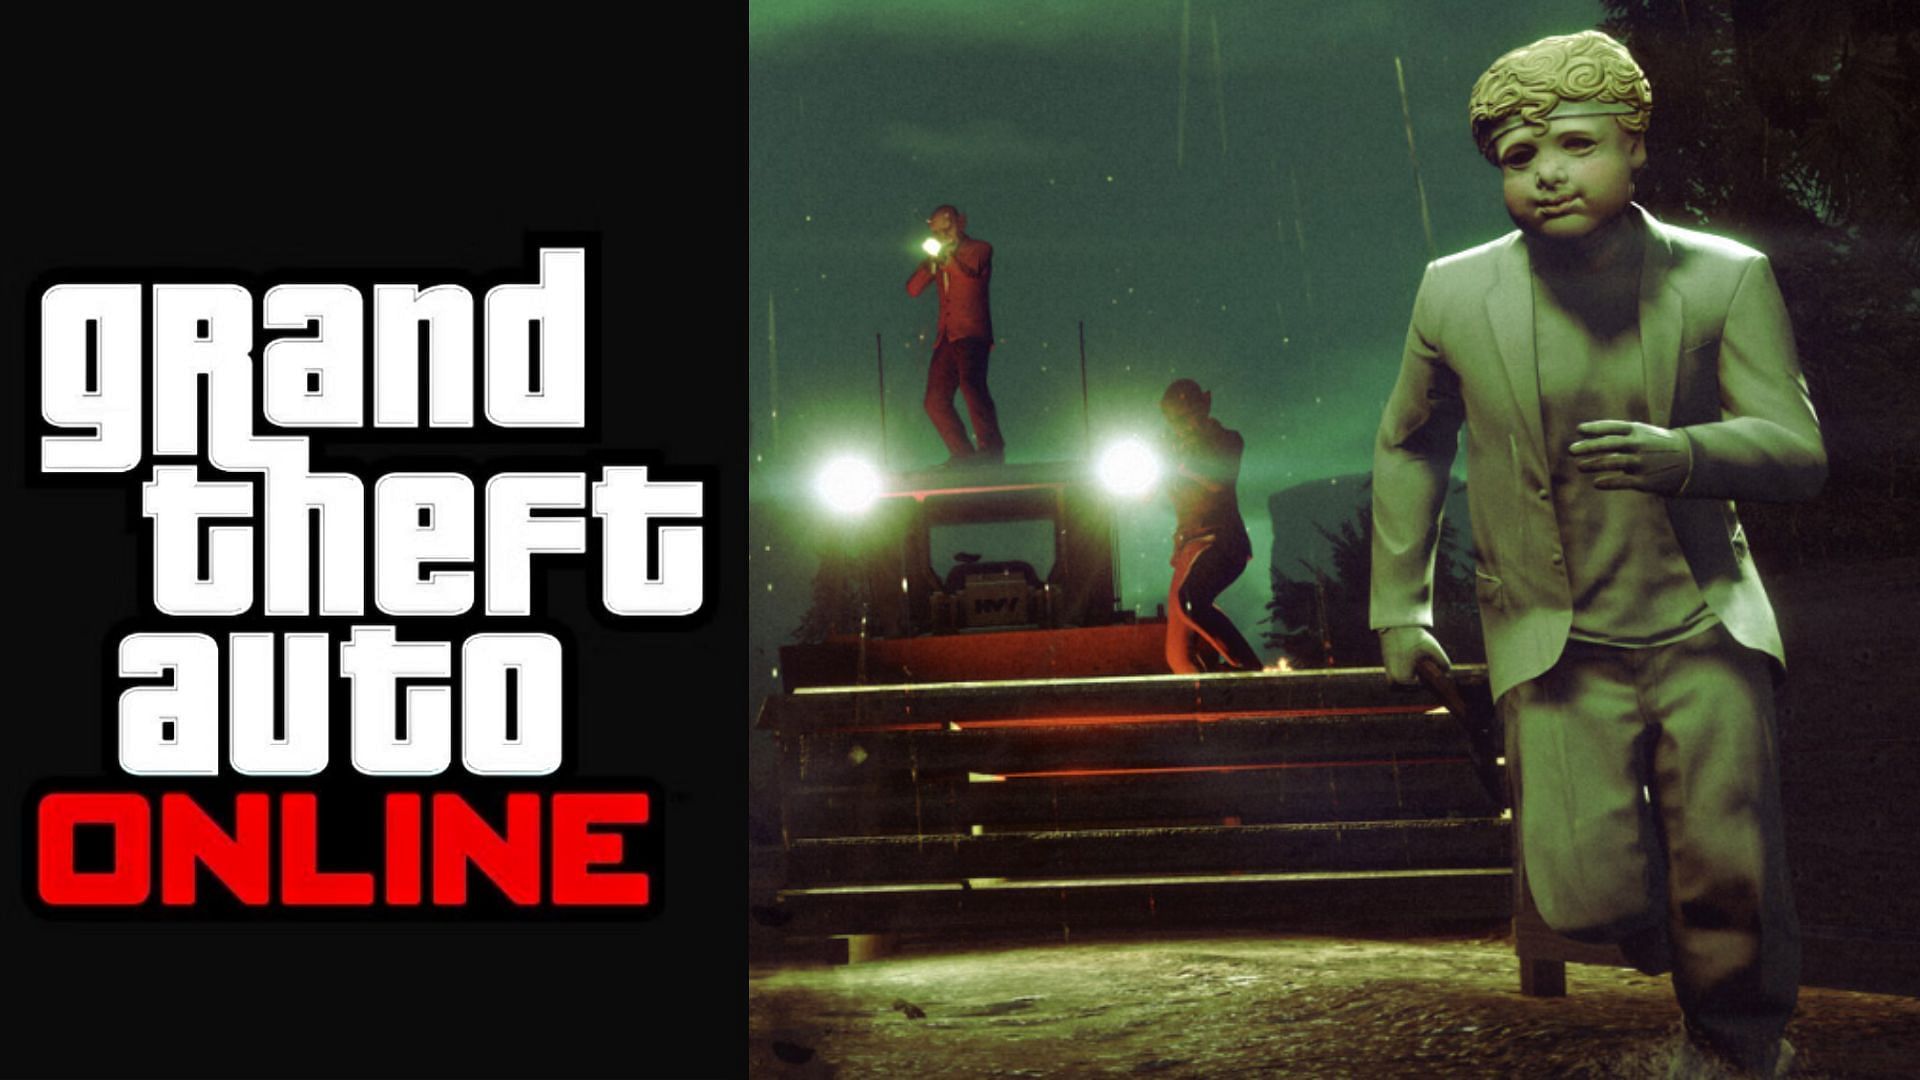 A brief about the Lost vs Damned Adversary Mode in GTA Online (Image via Rockstar Games)